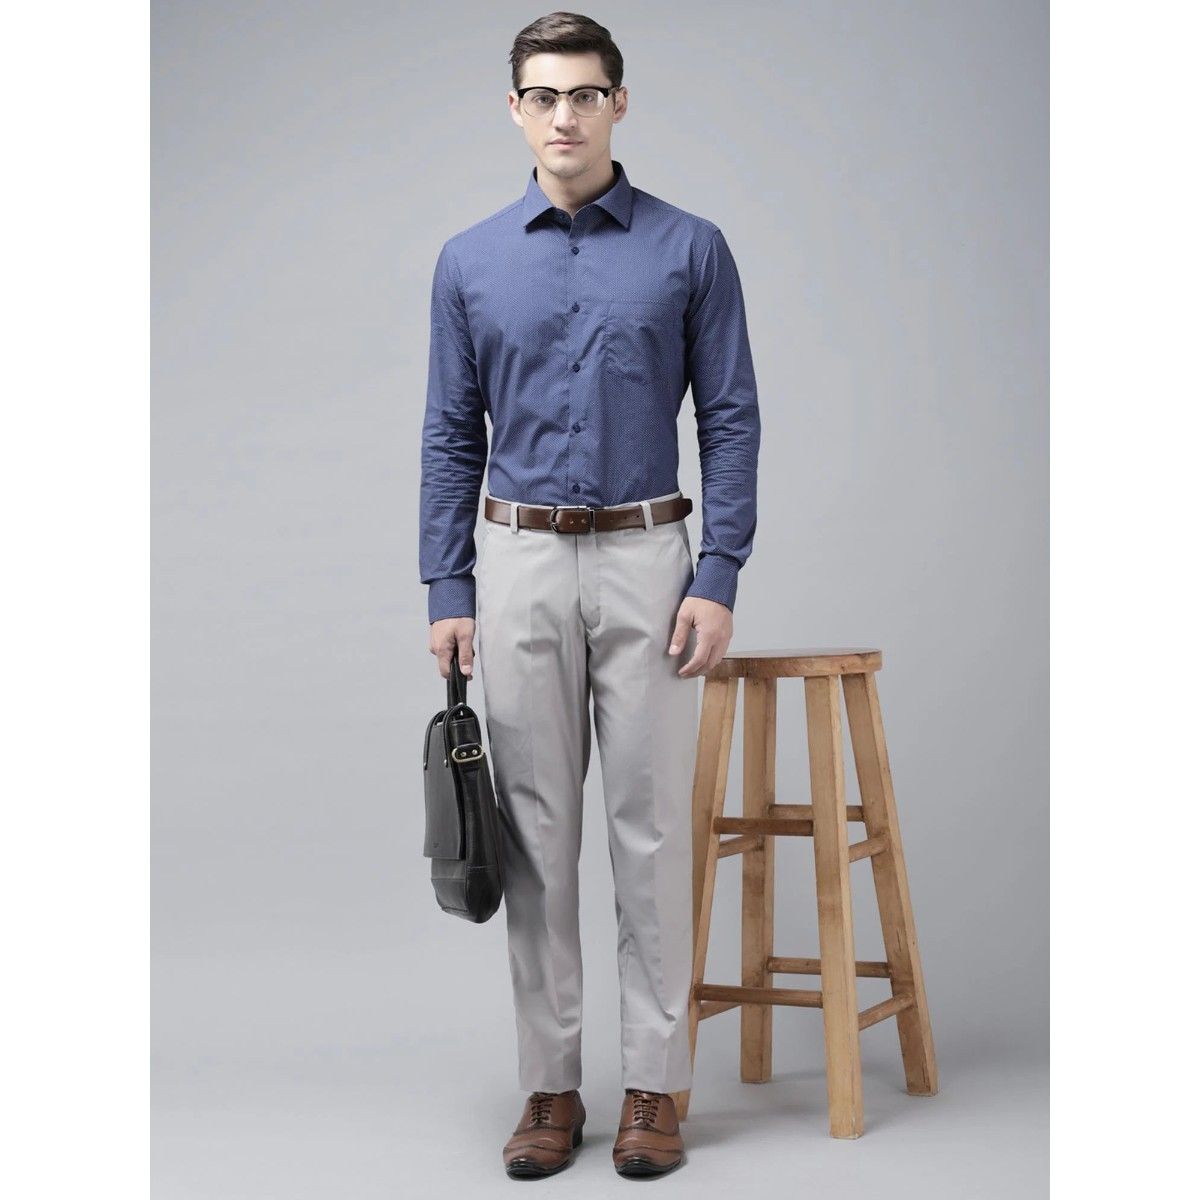 Steeler light grey color double-side round pockets & jetted back pockets  cotton trousers